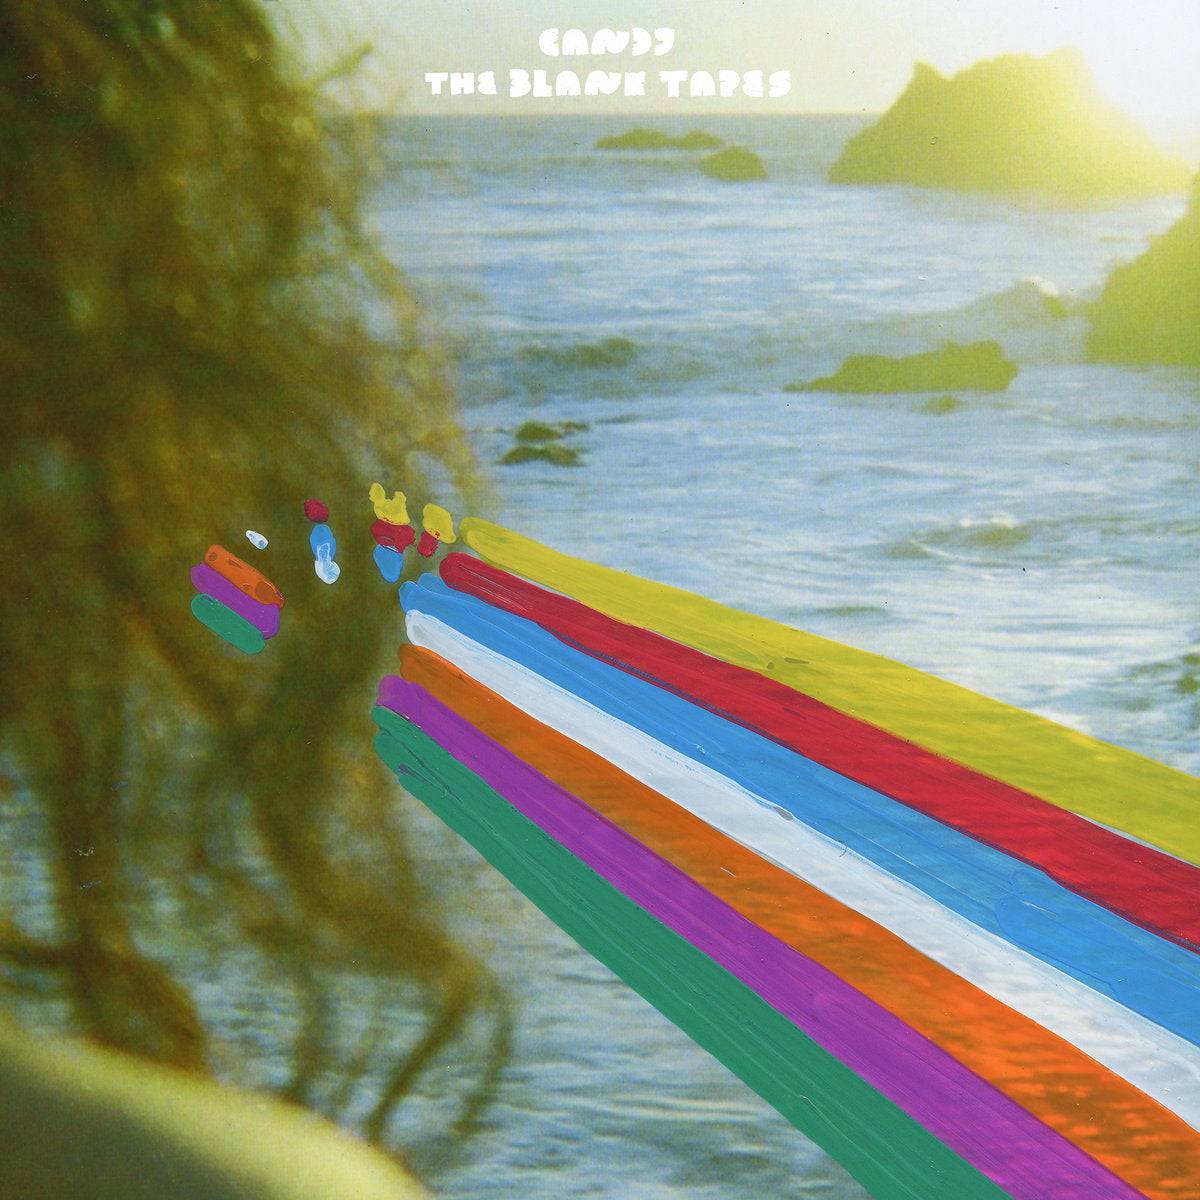 The Blank Tapes - Candy LP